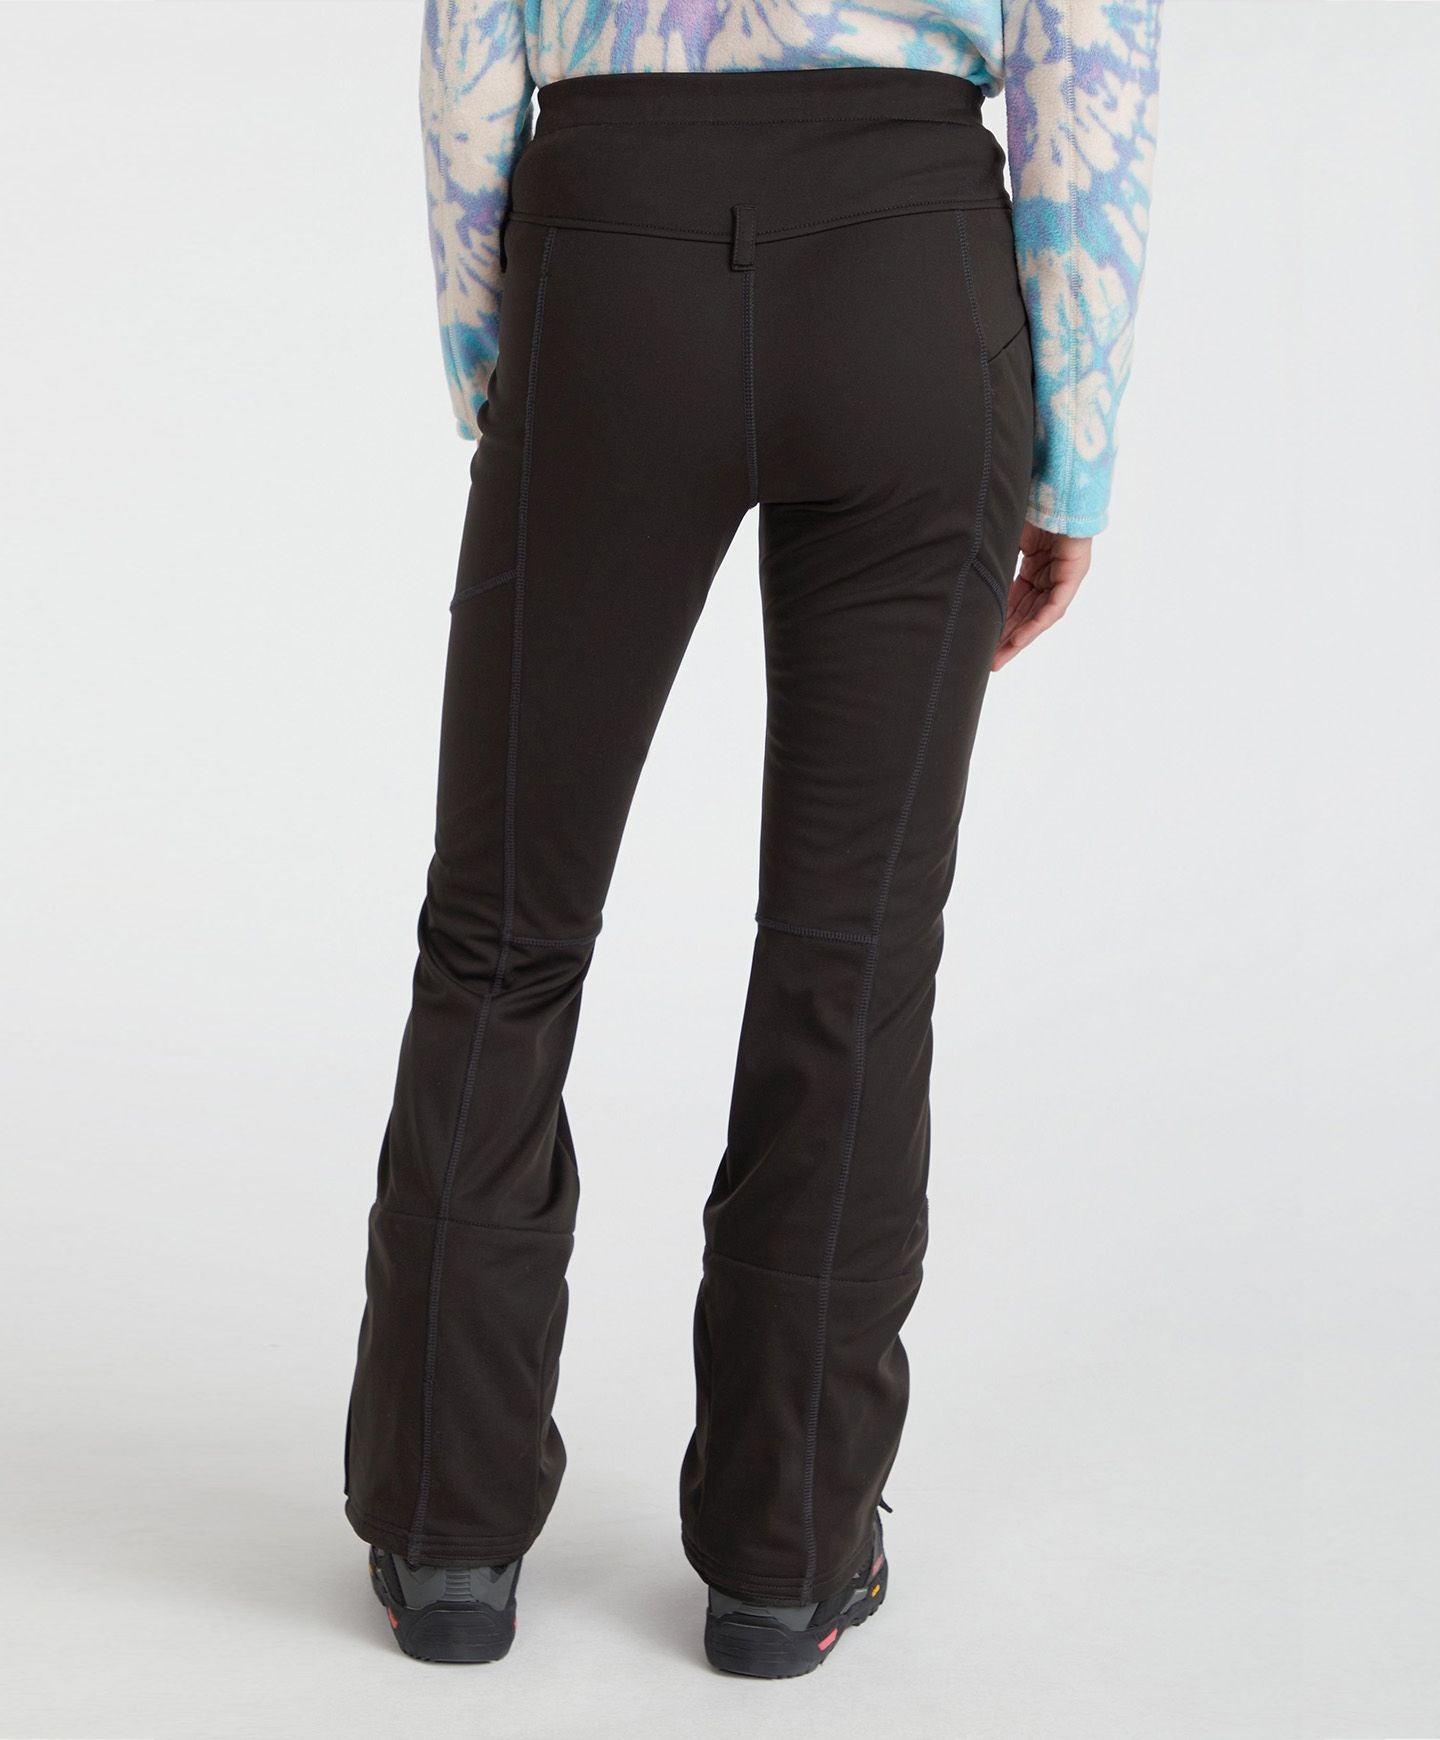 Women's Blessed Snow Pants - Black Out